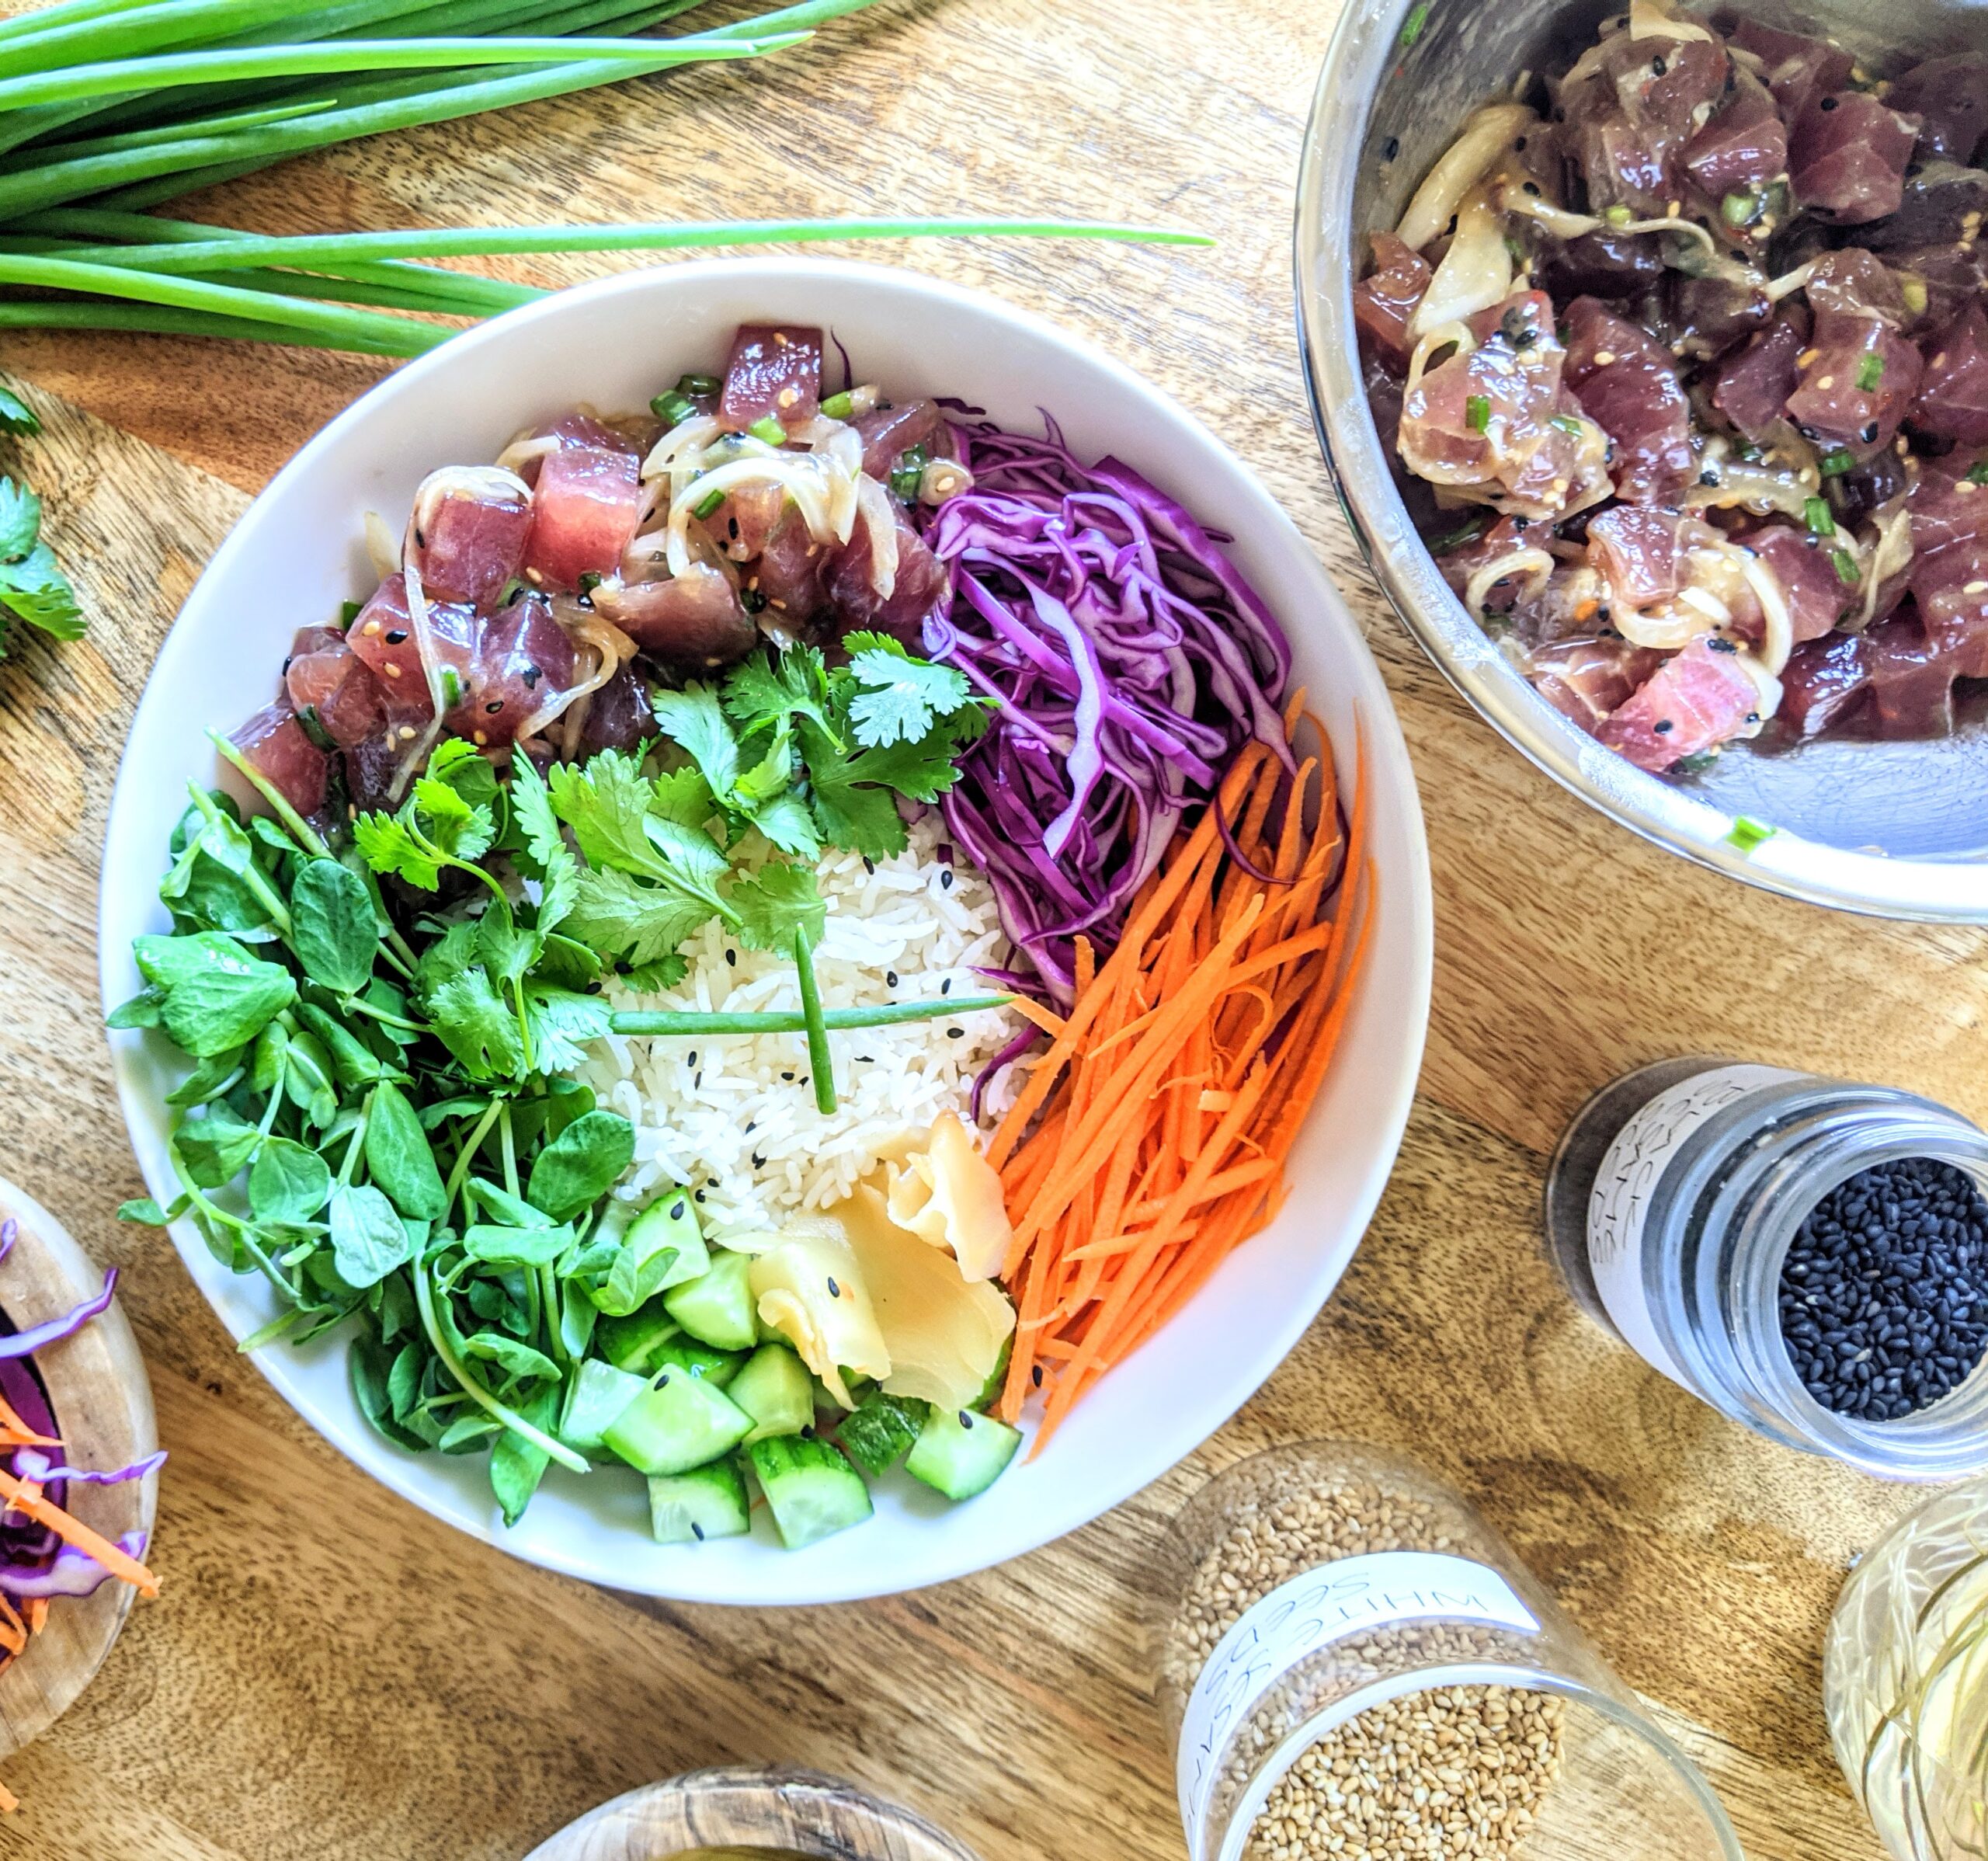 A vibrant and colorful Hawaiian Tuna Poke Bowl, filled with cubes of marinated ahi tuna, shredded purple cabbage and carrots, diced Persian cucumbers, pea shoots, pickled ginger and steamed Jasmine rice. Garnished with sliced Japanese scallion and toasted sesame seeds.